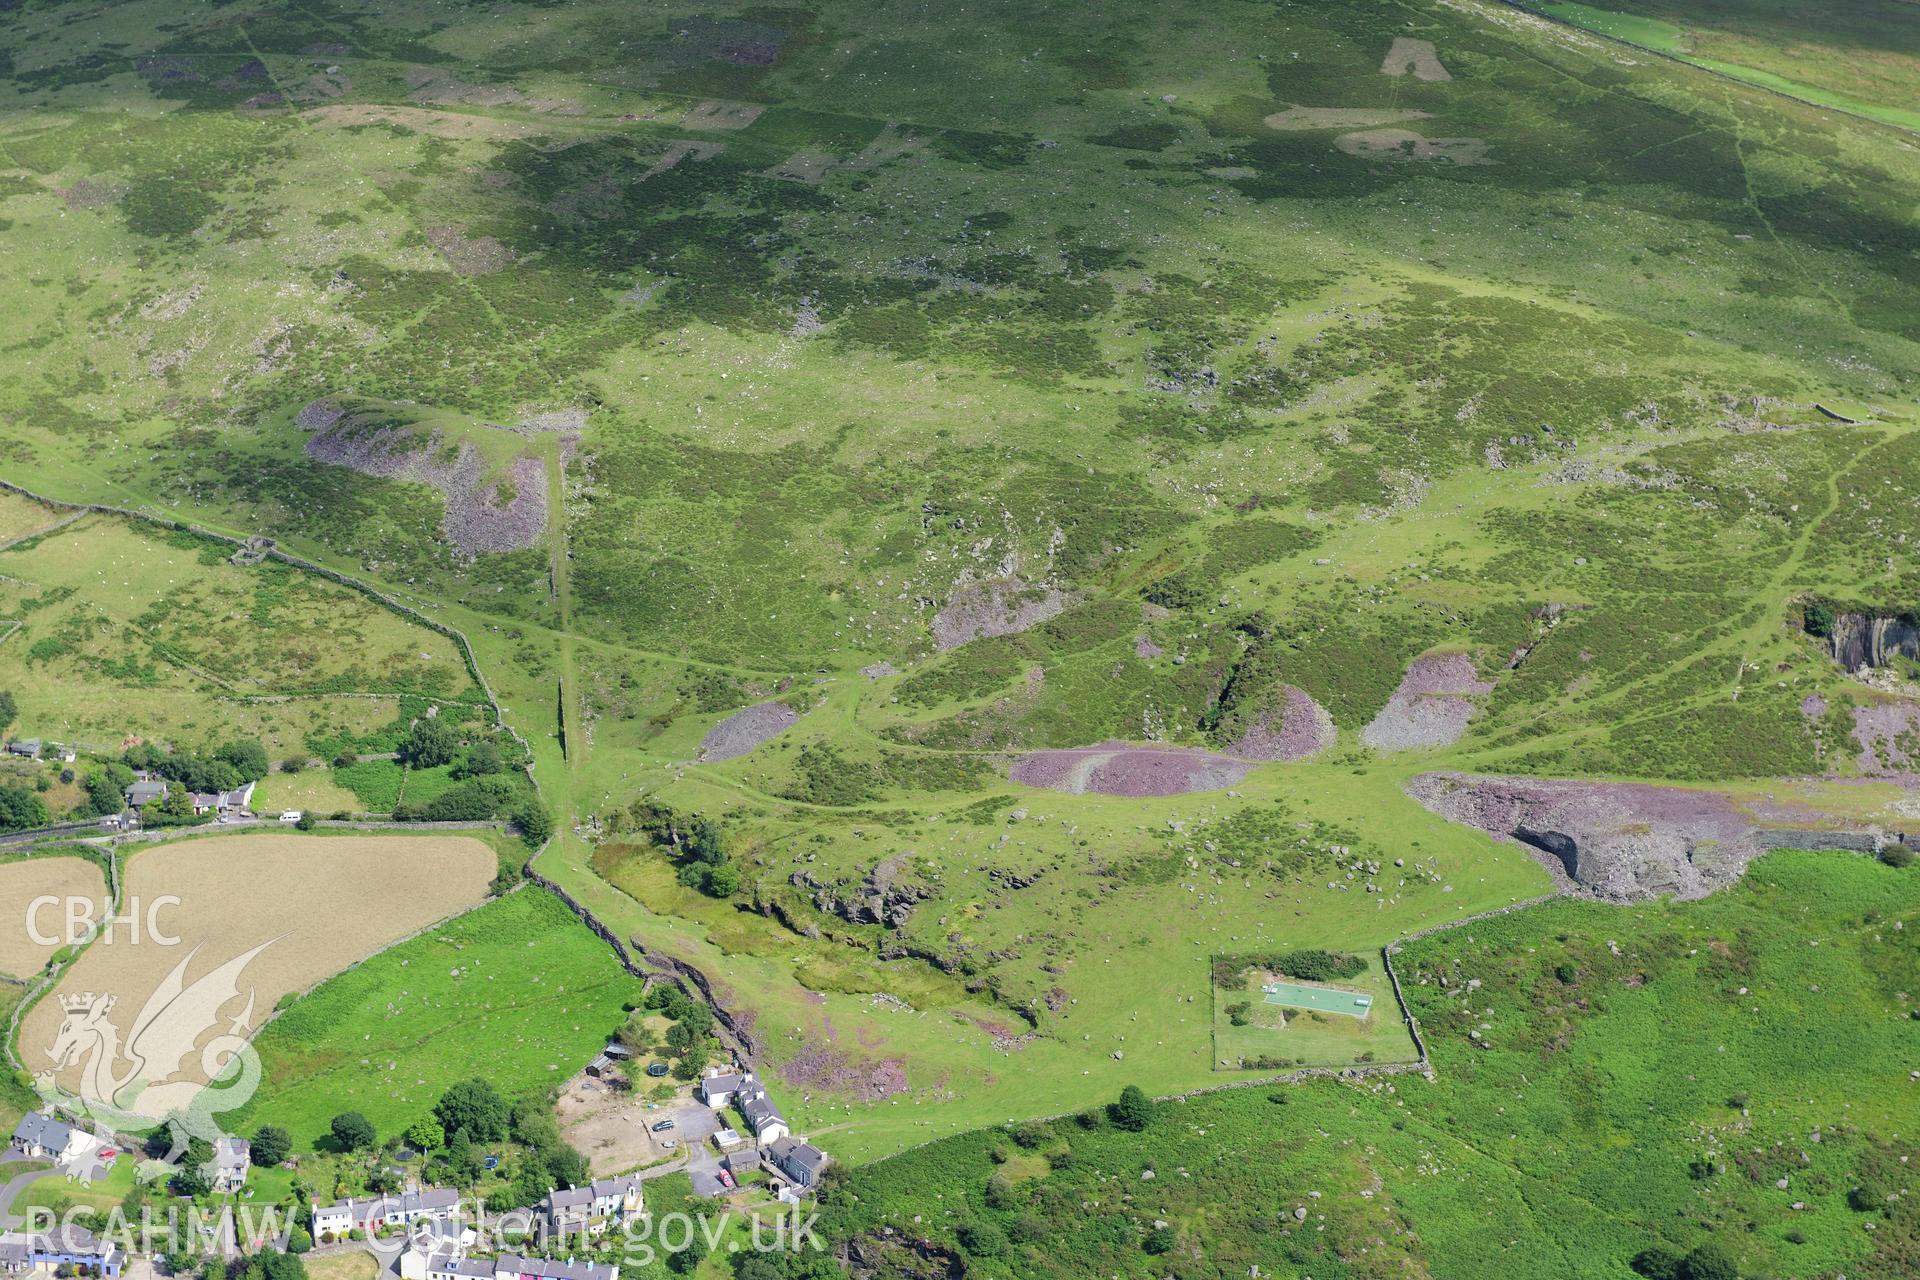 RCAHMW colour oblique photograph of Rachub quarries, viewed from the west. Taken by Toby Driver on 10/08/2012.